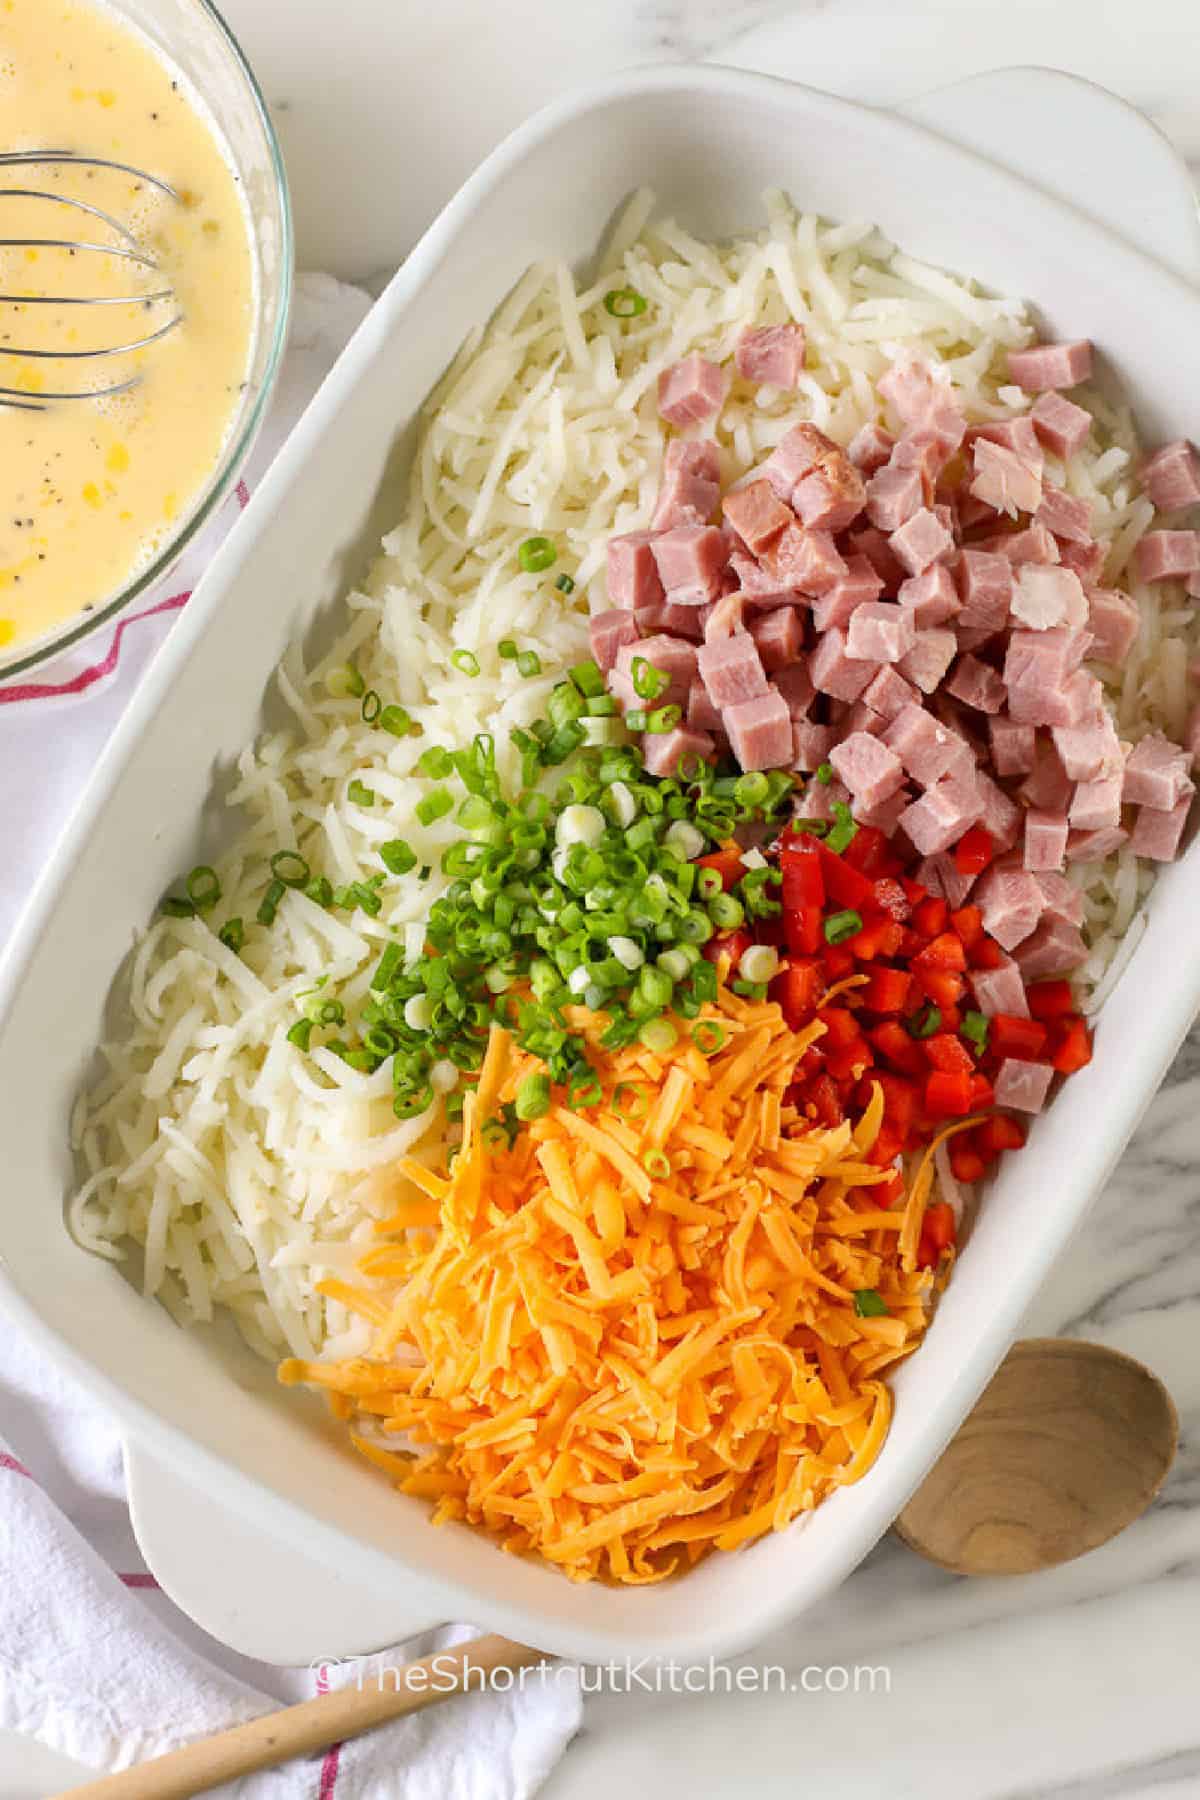 ham, hash brown potatoes, green onion, cheese and red peppers in a white casserole dish, with whisked eggs on the side, ready to make hash brown breakfast casserole